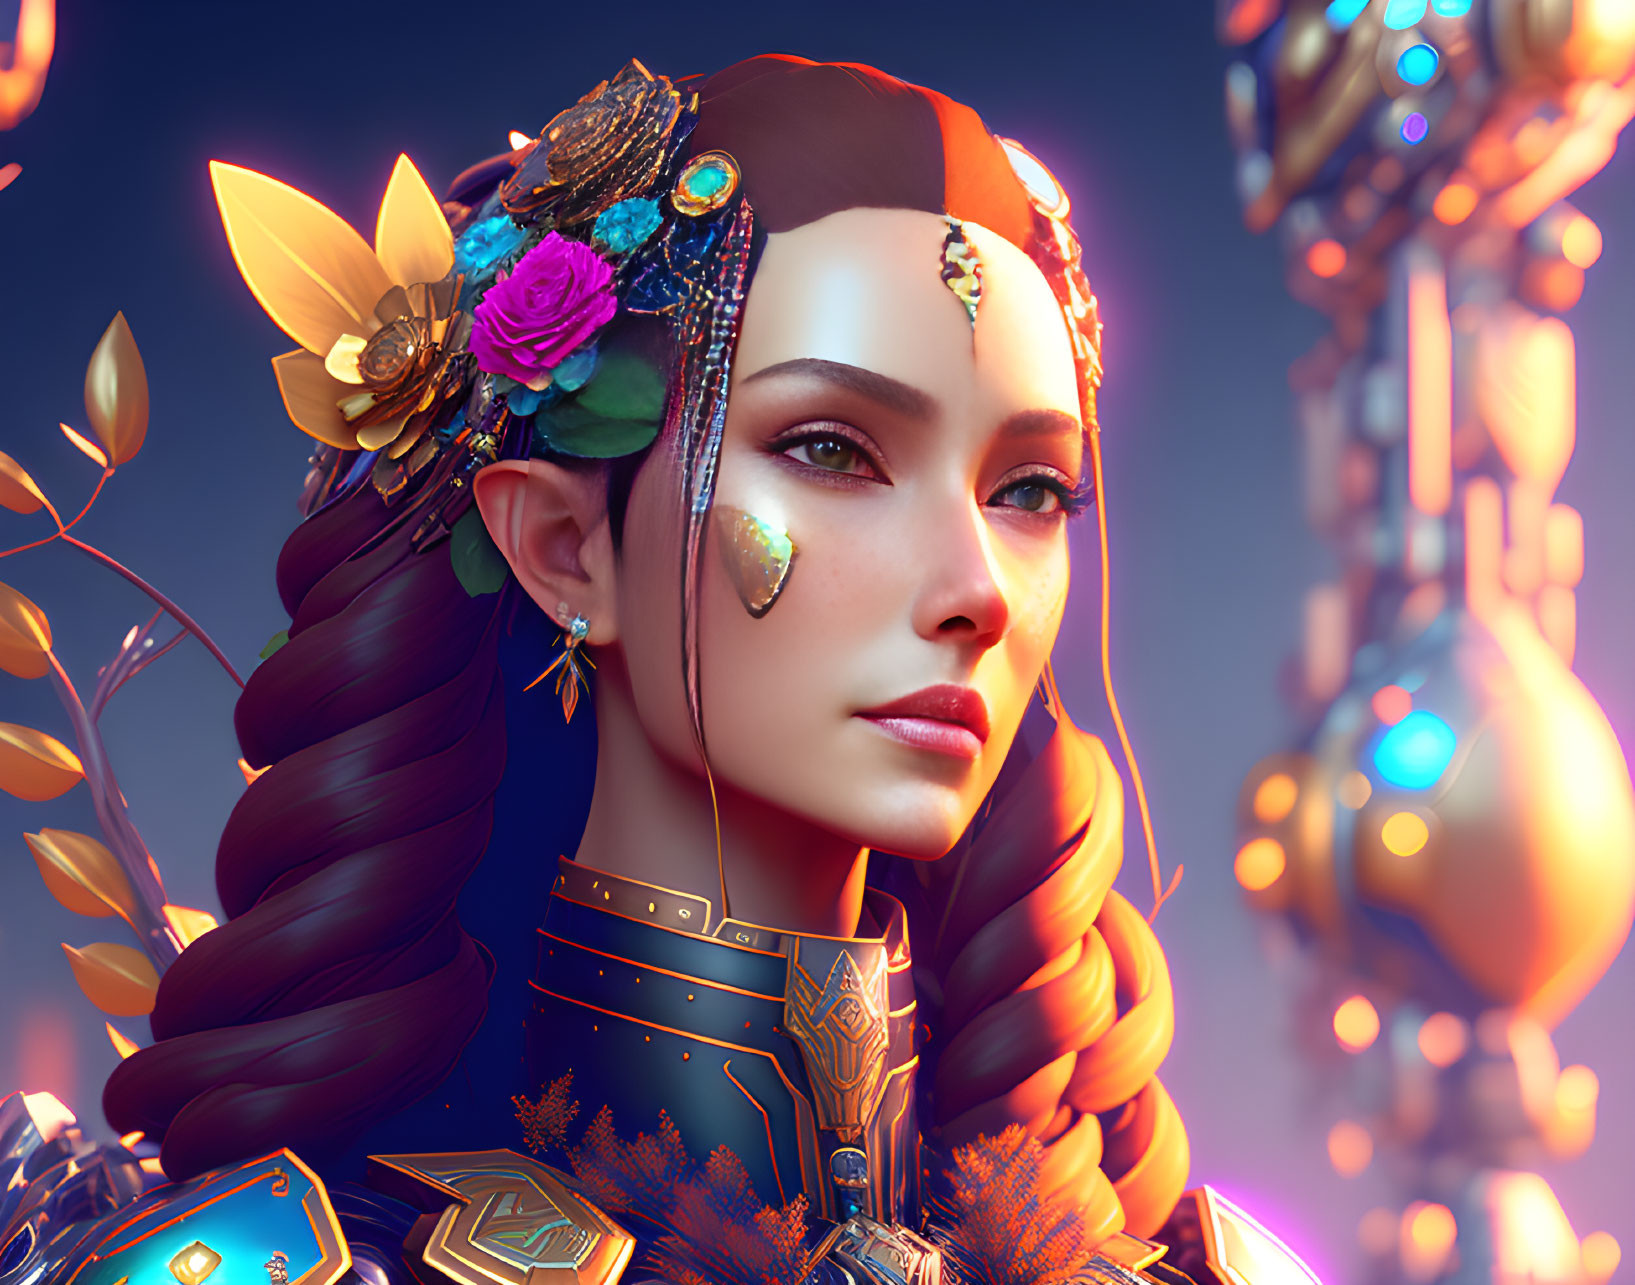 Detailed digital portrait of woman in ornate headdress and futuristic armor on soft glowing background